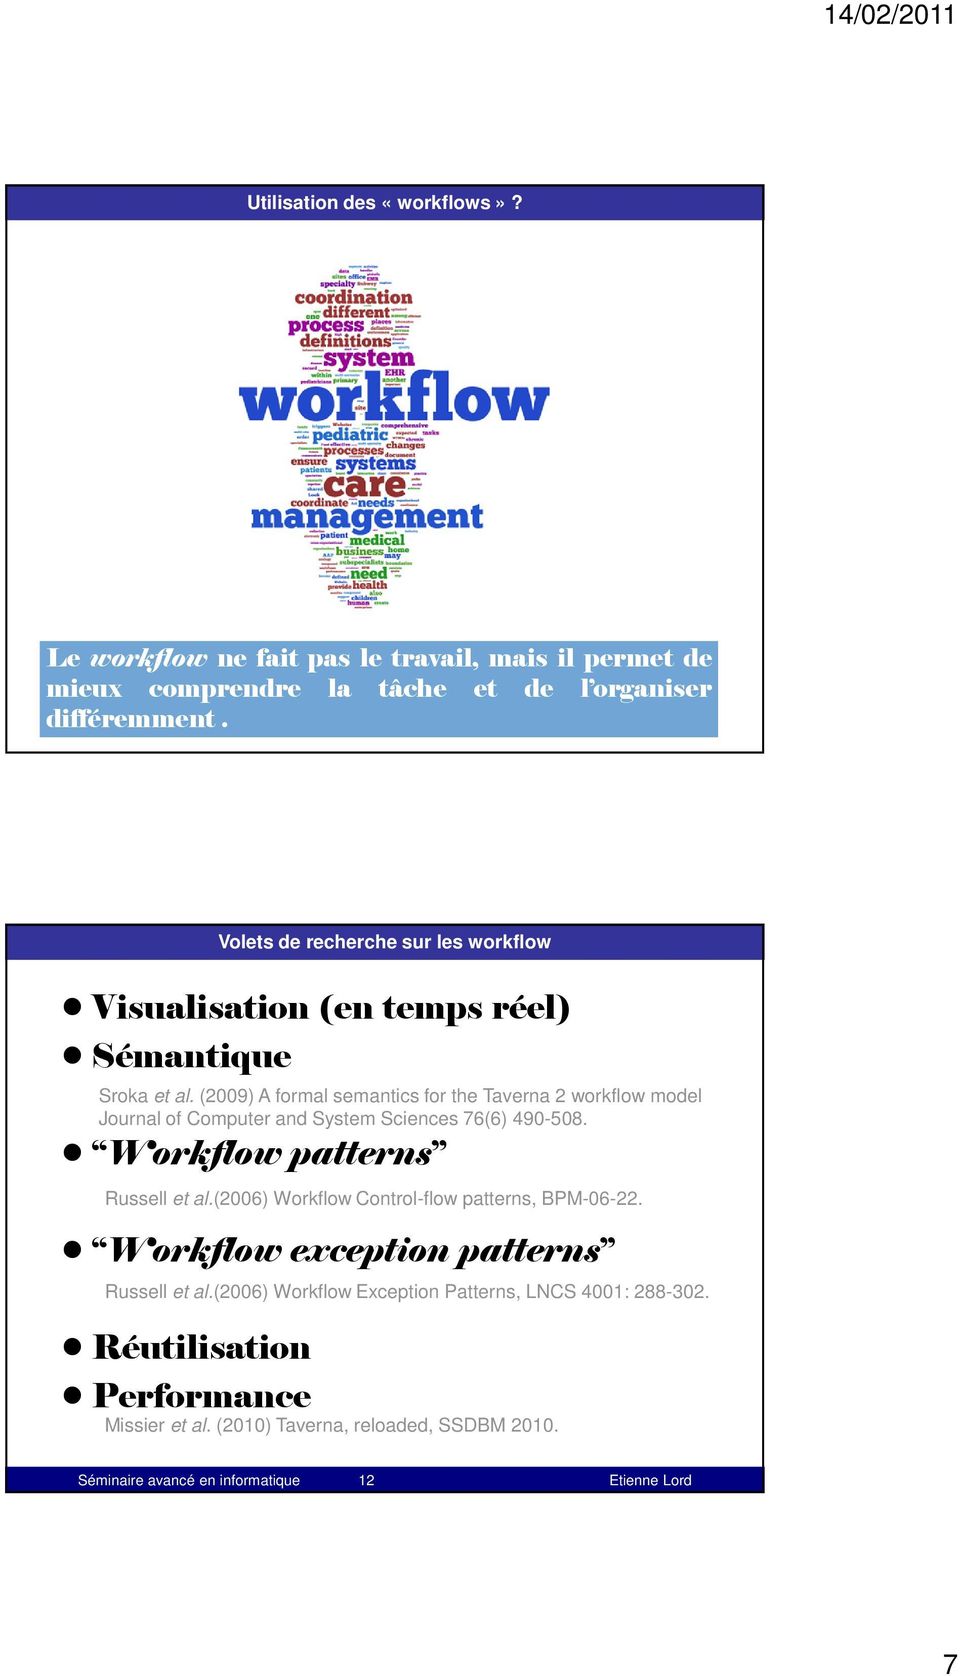 Primary Care EMR Workflow Systems: Key Ideas By CHUCKWEBSTER Published: NOVEMBER 17, 2009 différemment.